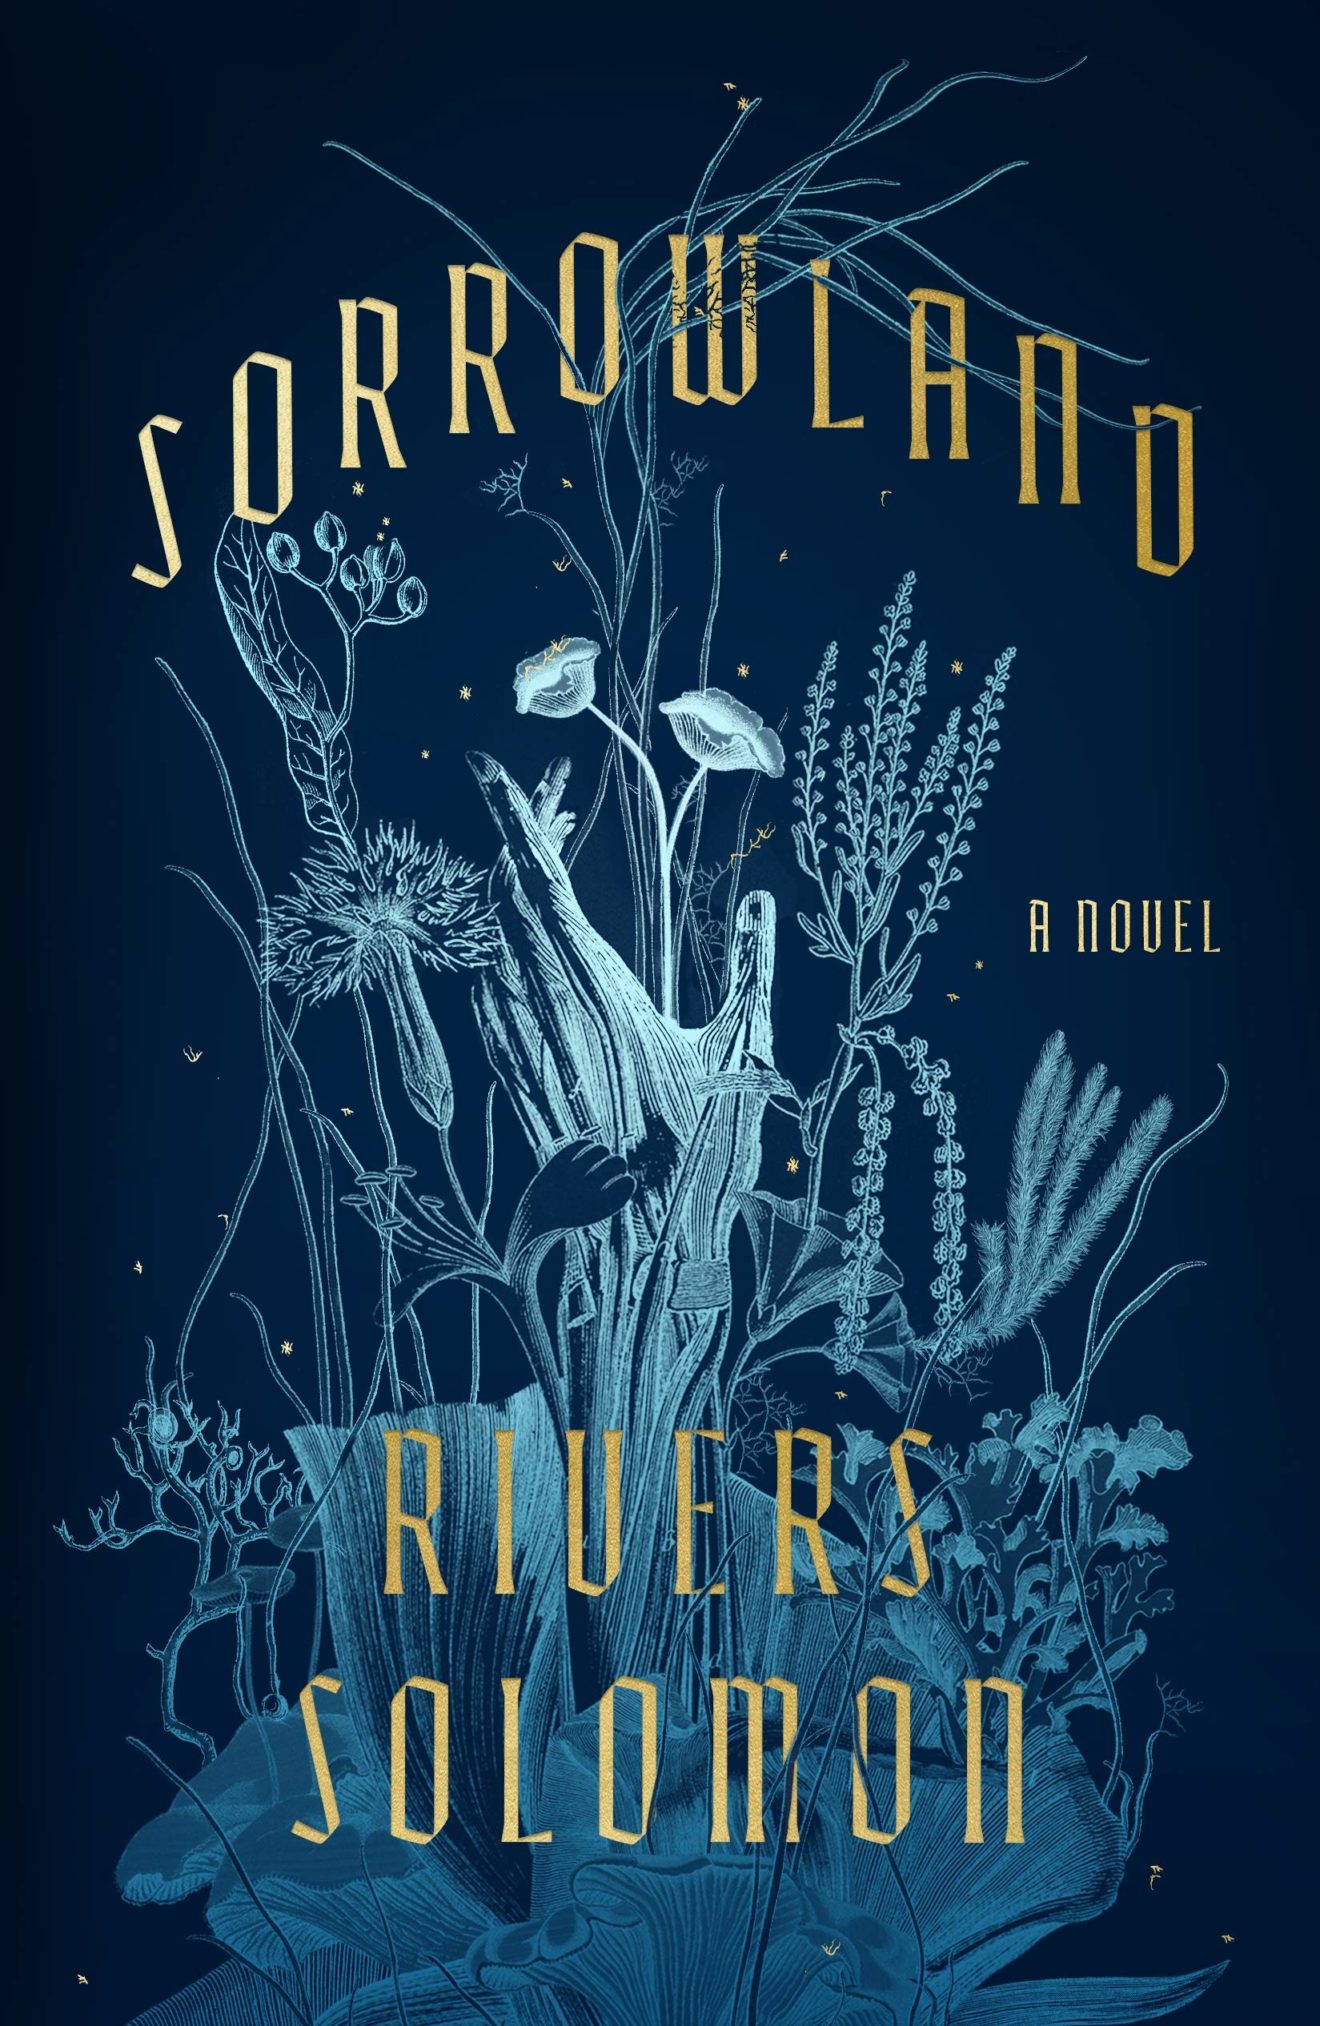 sorrowland book review